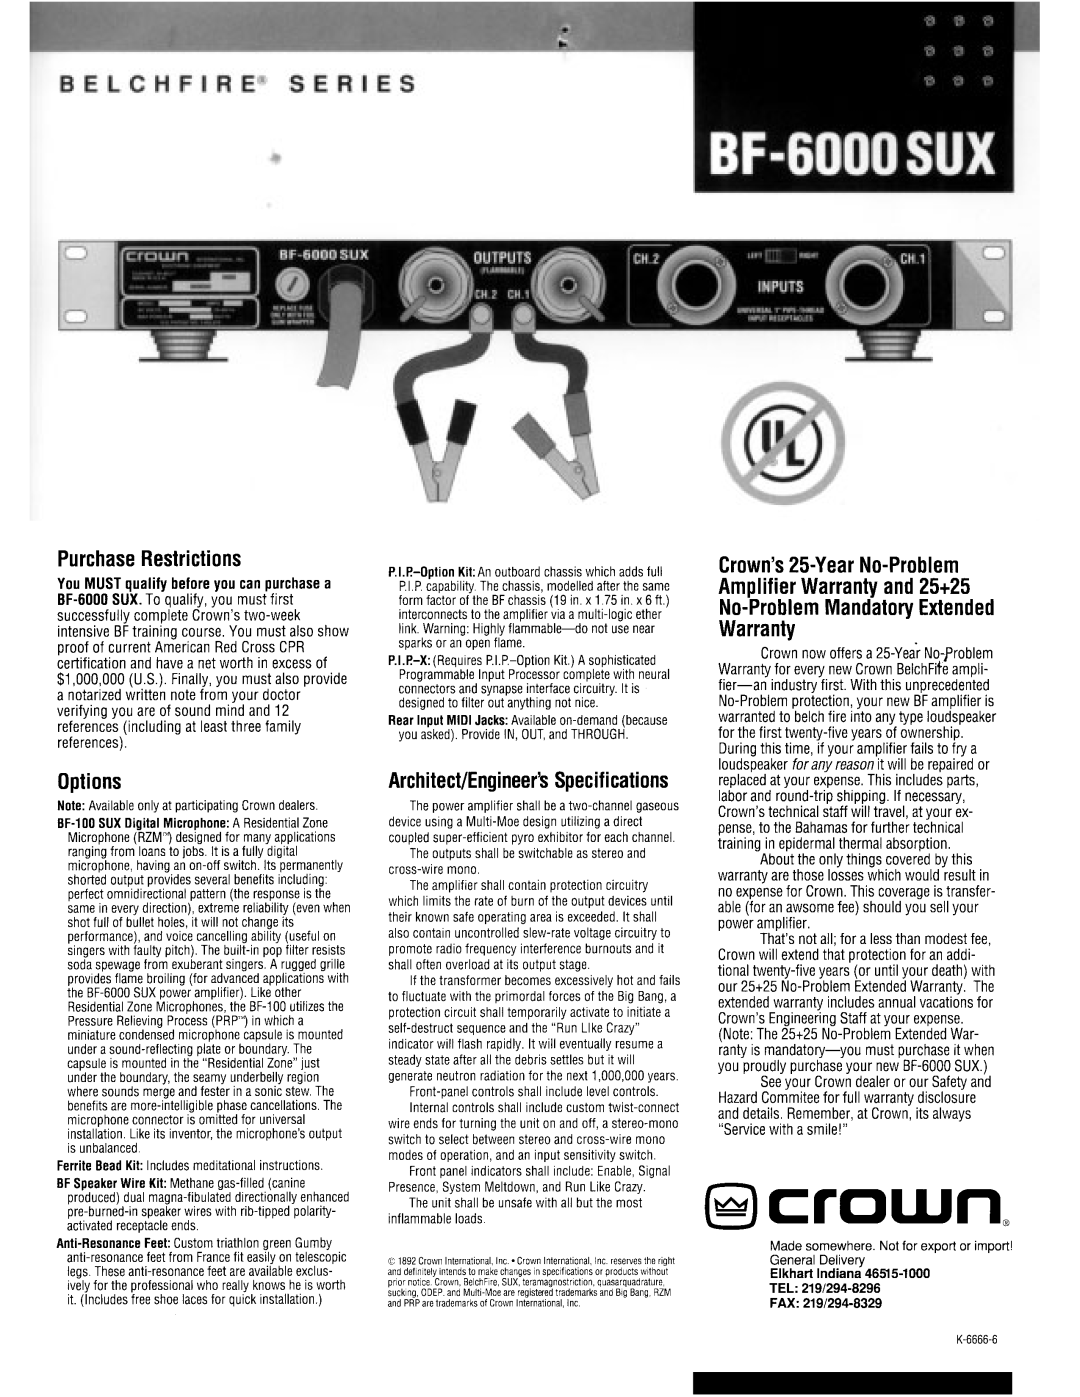 Crown Audio BF-6000 SUX manual 